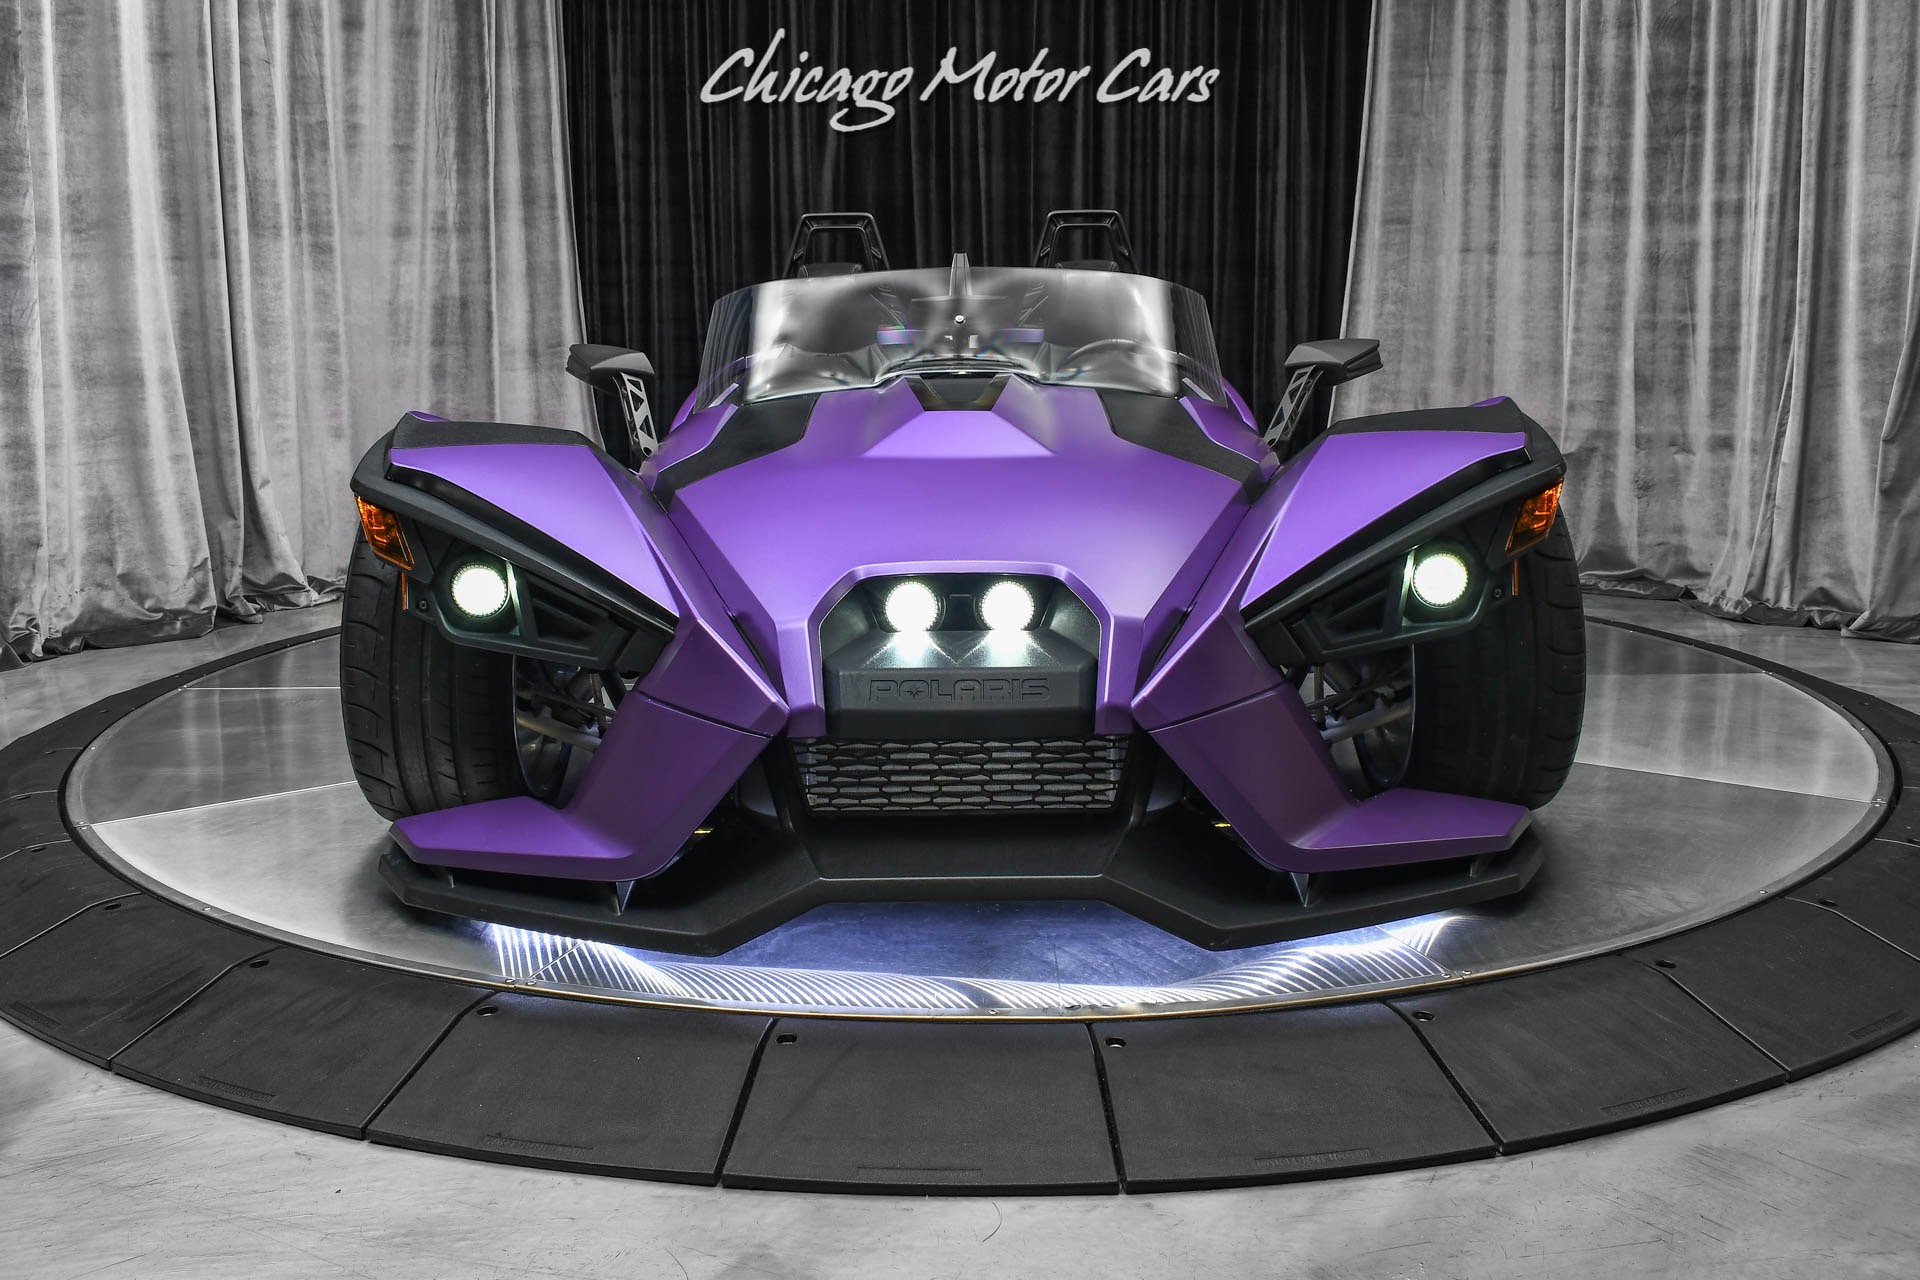 Used 2016 POLARIS SLINGSHOT ALPHA Turbo Kit! ADV1 Wheels! $20K In Upgrades!  ONLY 3K Miles! For Sale (Special Pricing) Chicago Motor Cars Stock  #1125449WN